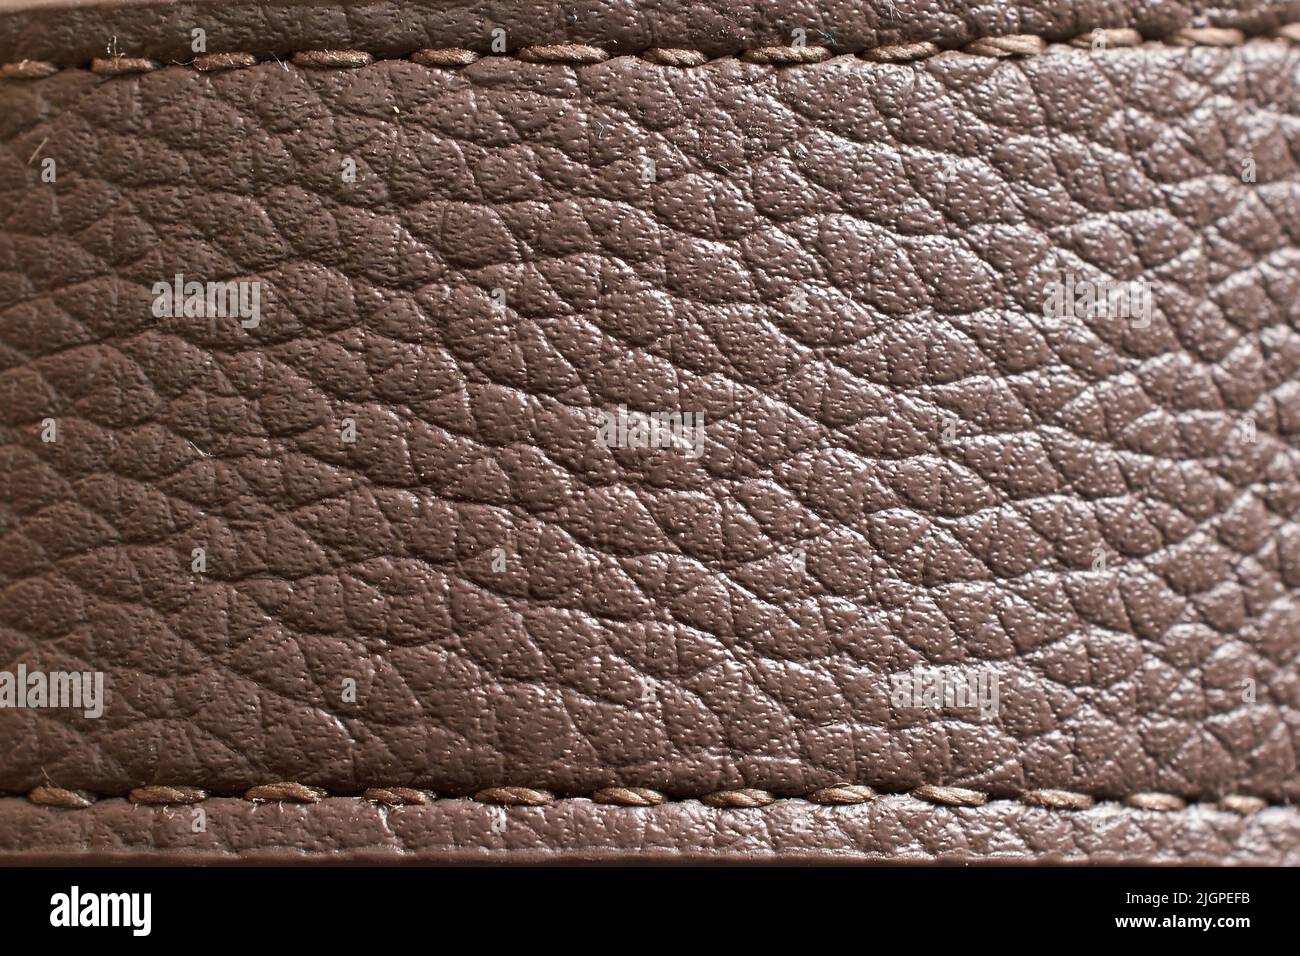 The texture of a brown leather watch strap. Close-up Stock Photo